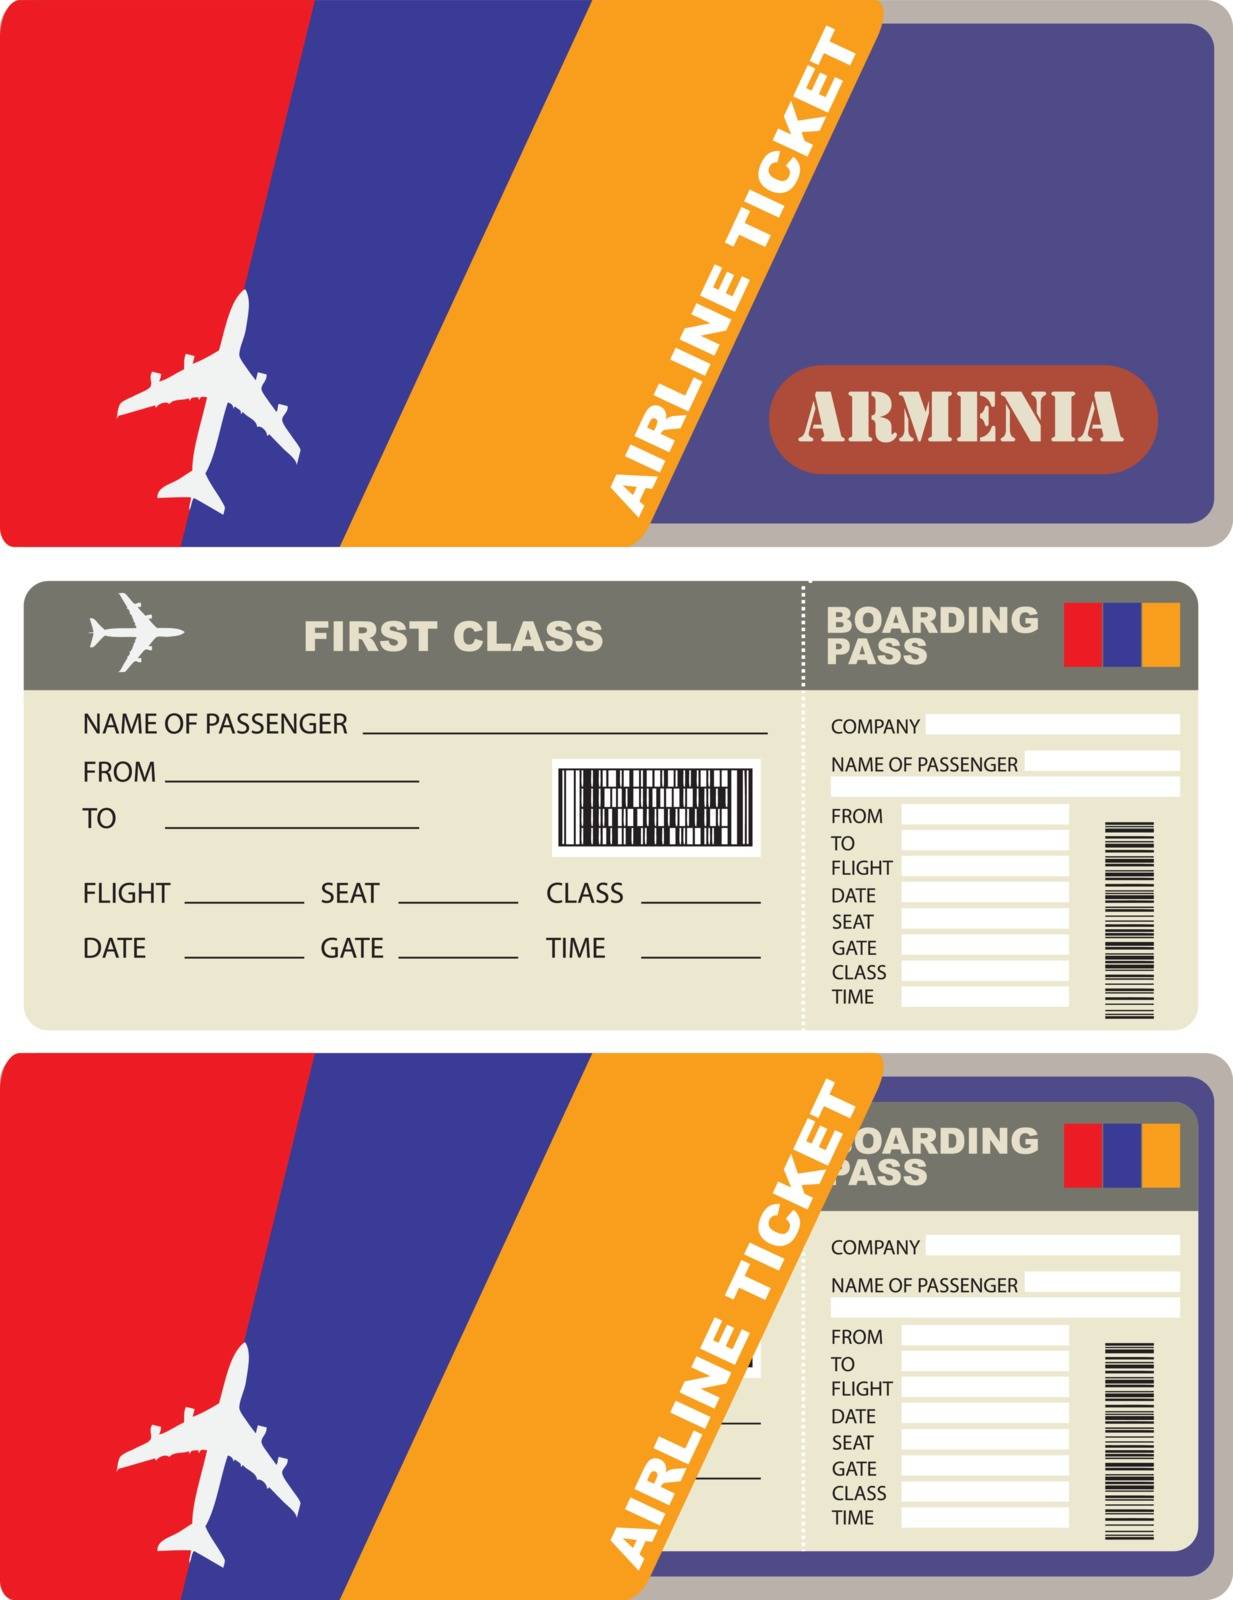 Flight trip for a flight to Armenia with the service envelope.